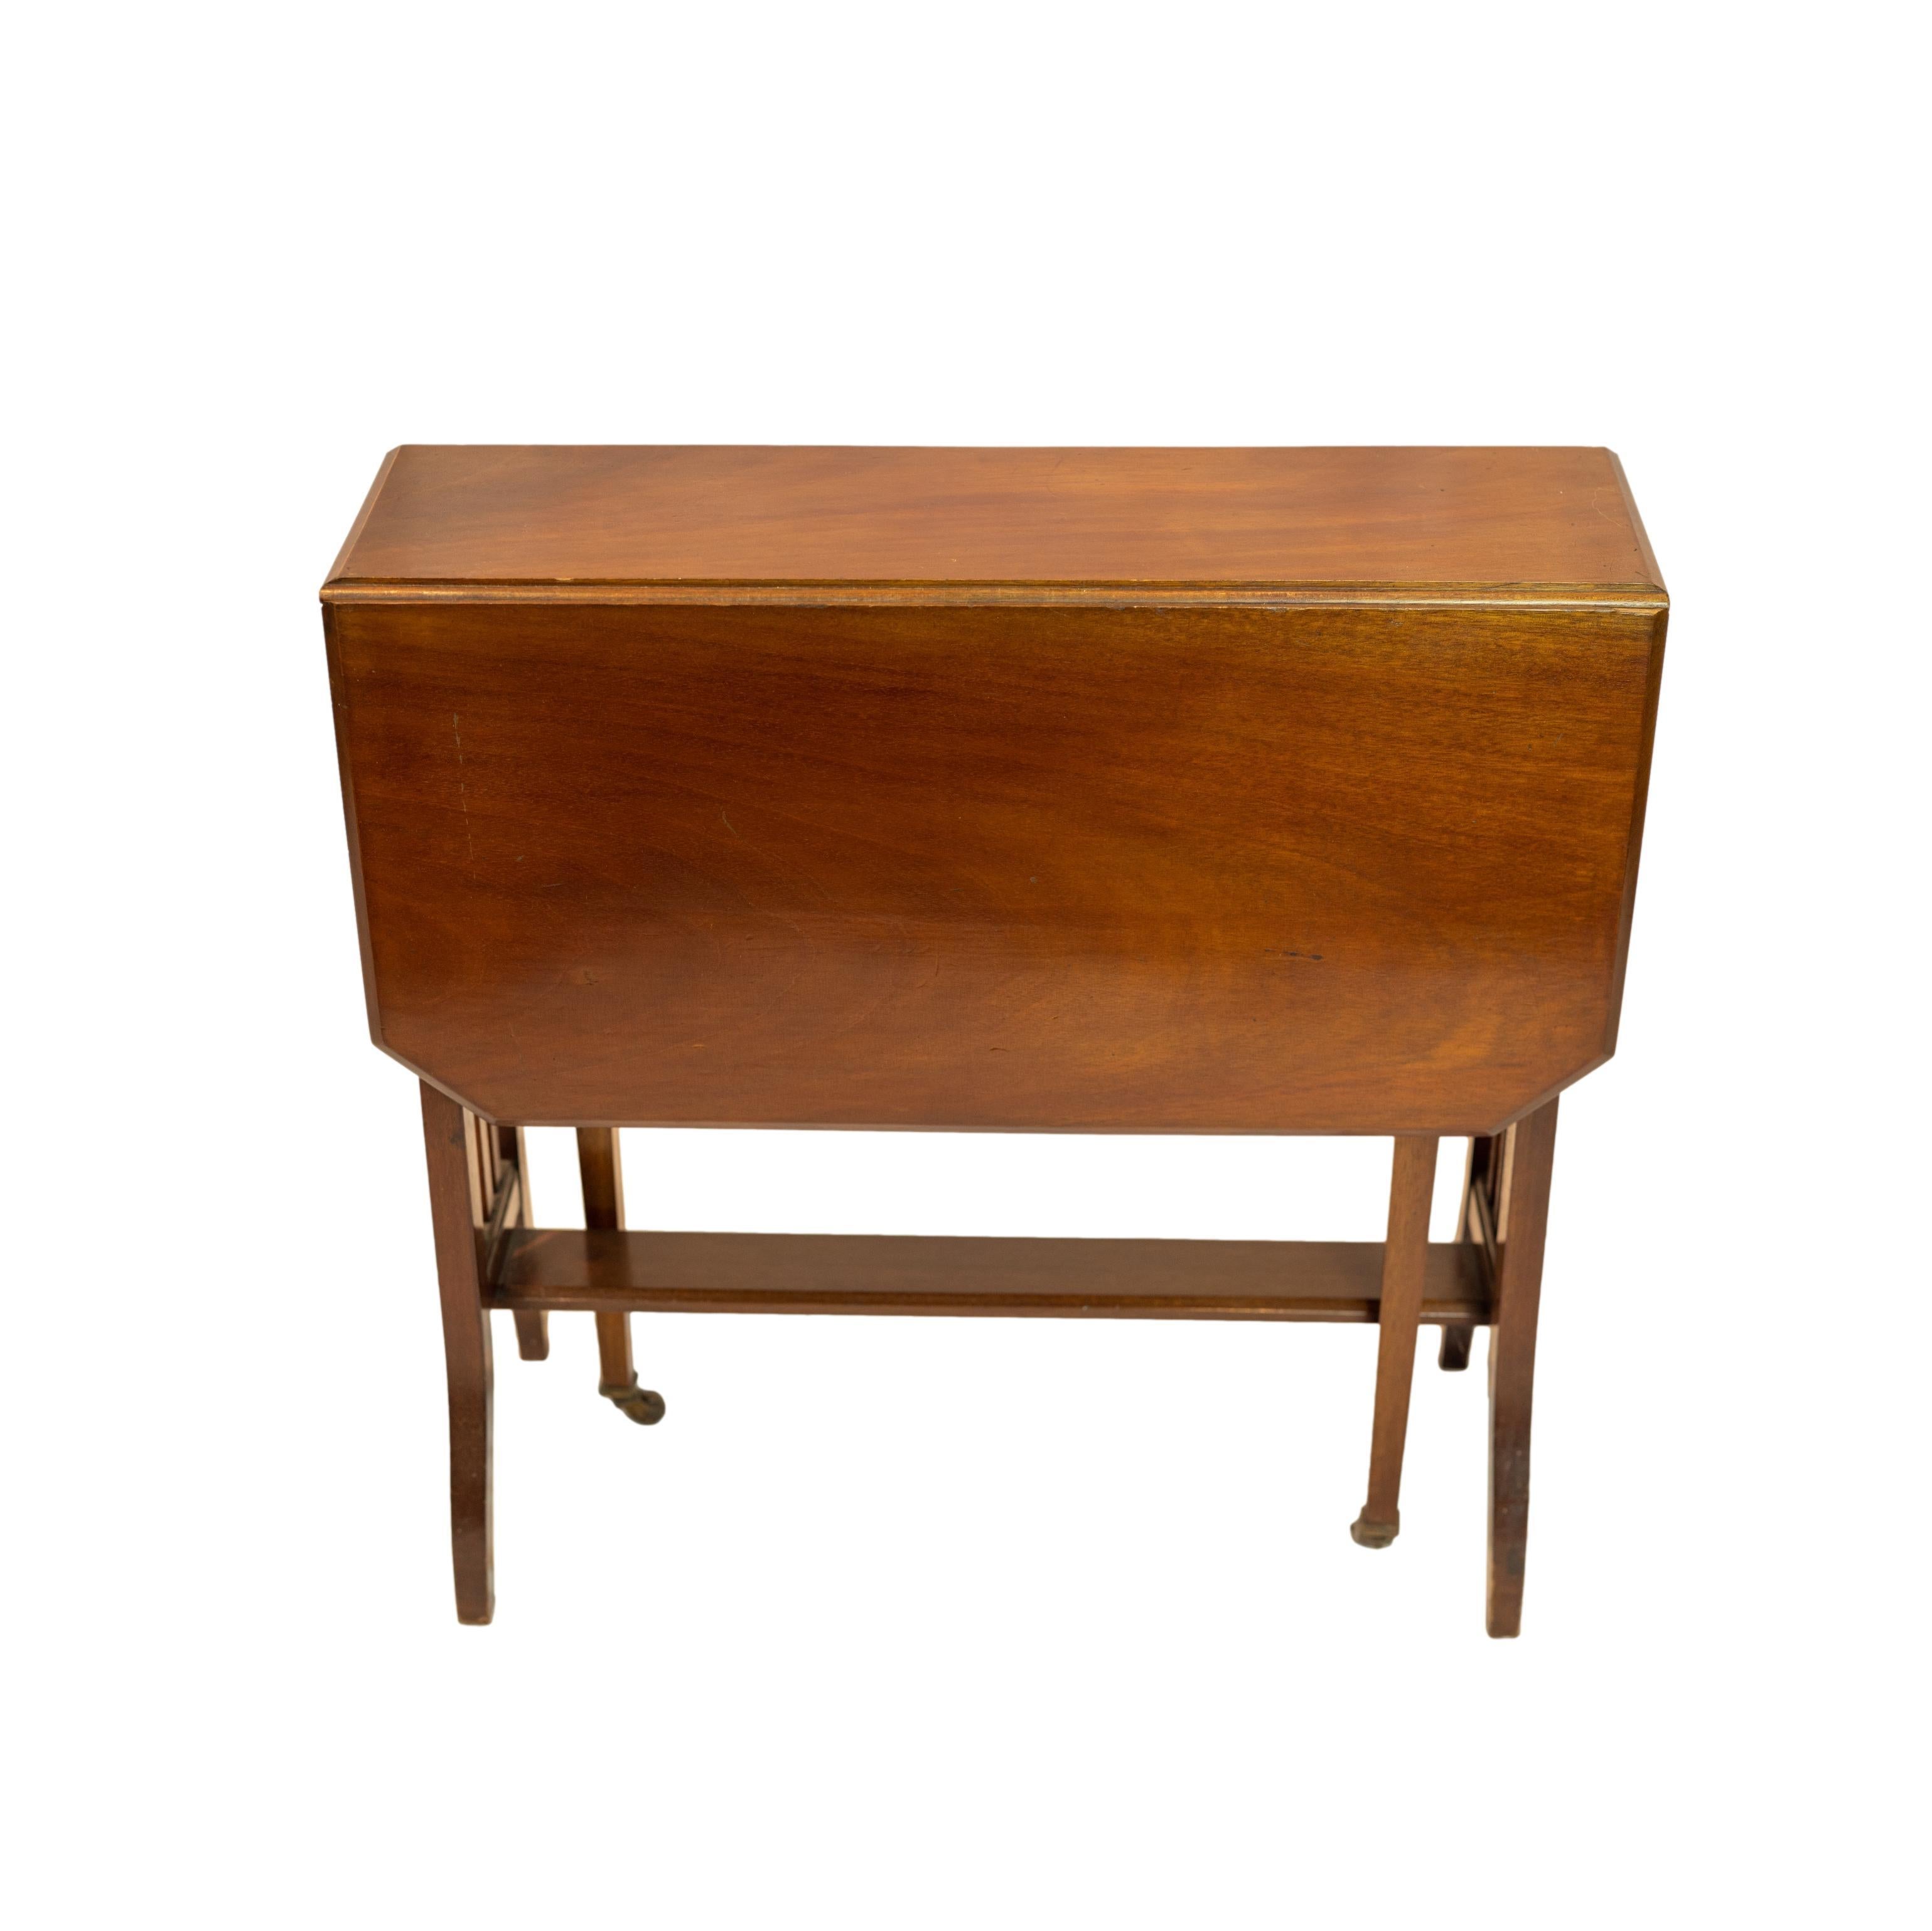 Arts and Crafts drop-leaf Sutherland table, the narrow tabletop in mahogany (slight sun fading), with two canted-form mahogany drop-leaves, on an Arts & Crafts, slated and flared base, with central stretcher bar, and two retractable tapered legs